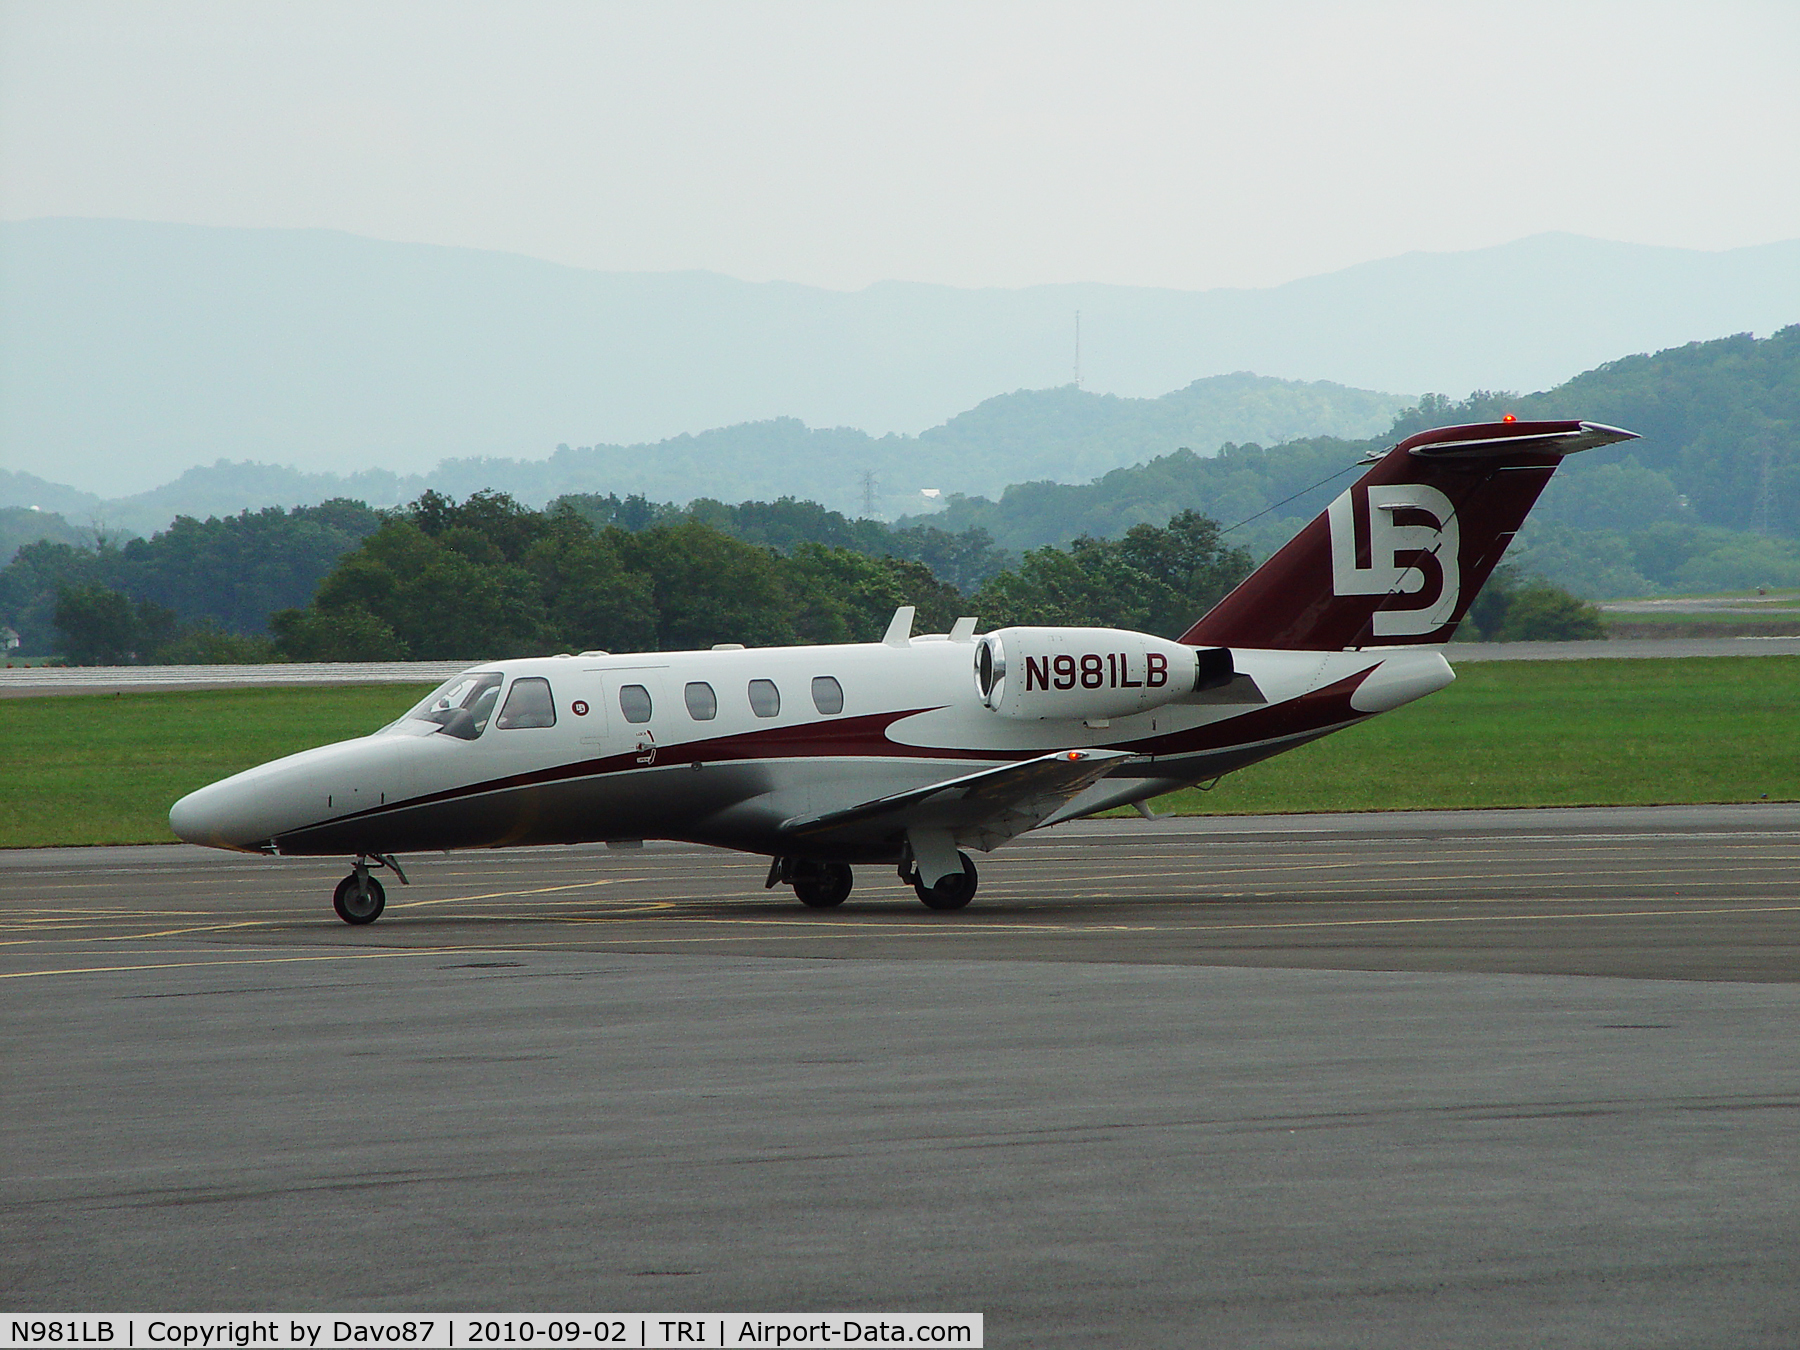 N981LB, 2005 Cessna 525 C/N 525-0546, N981LB parked at Tri-Cities Airport, Blountville, TN over Labor Day Weekend